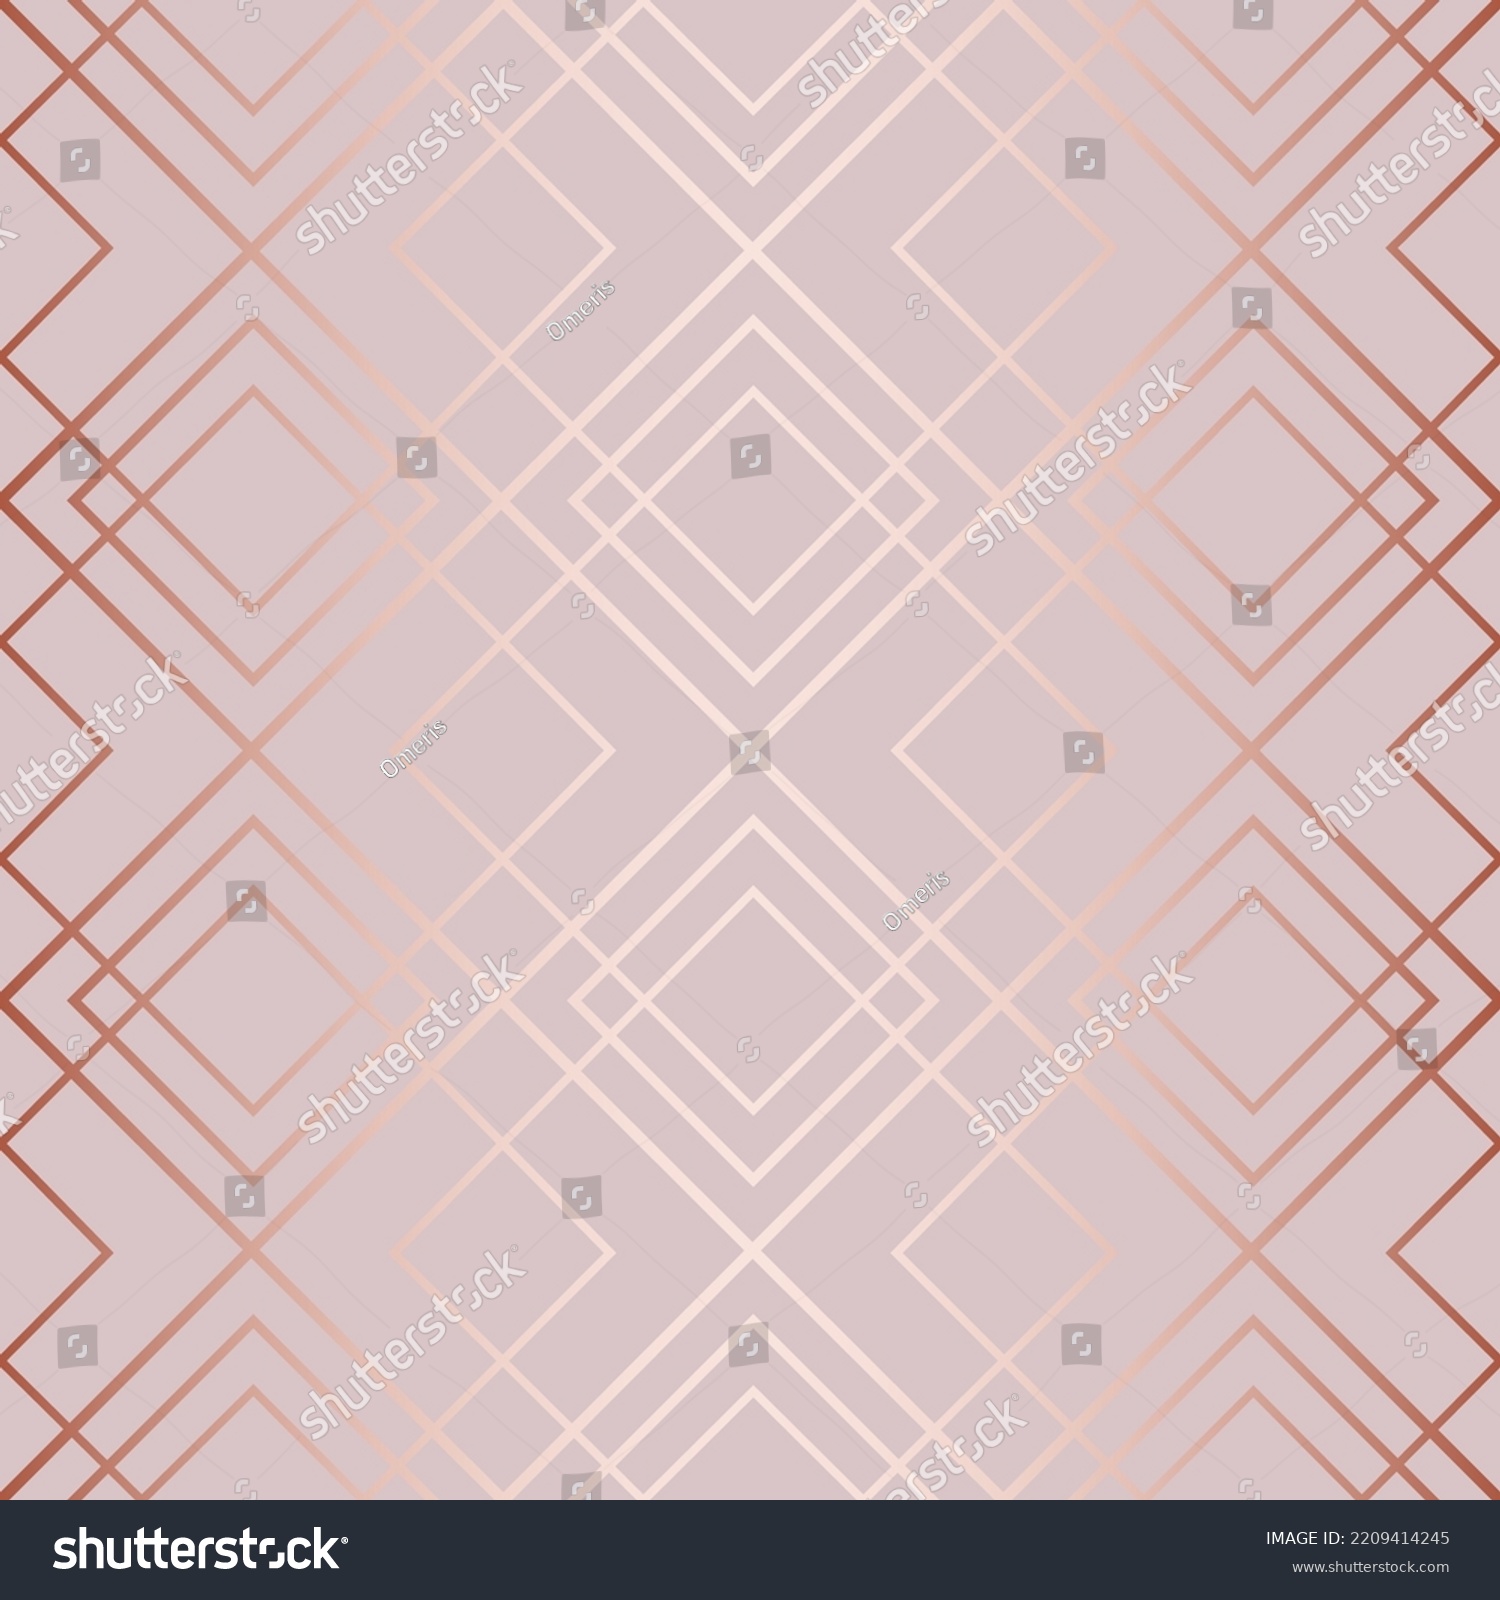 SVG of Diamond seamless pattern. Repeated rose gold fancy background. Modern art deco texture. Repeating gatsby patern for design prints. Repeat geometric wallpaper. Abstract geo lattice. Vector illustration svg